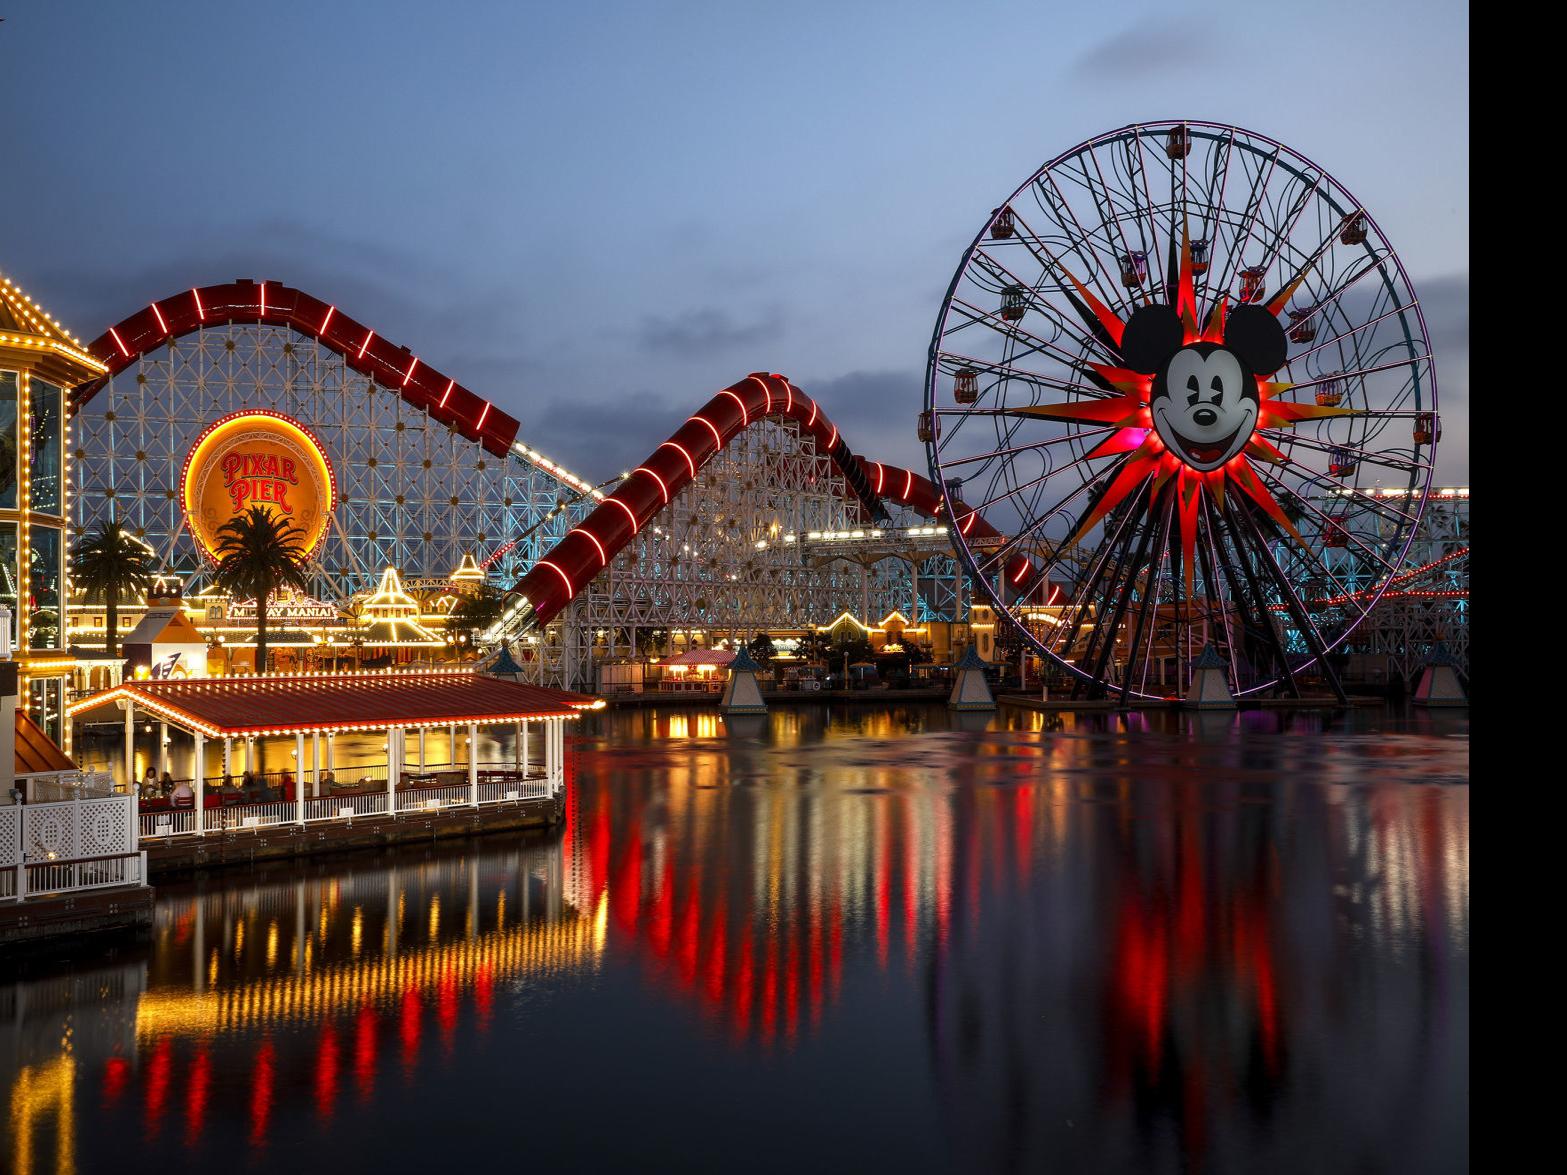 Pixar Pier Tells A Whole New Story Local Lompocrecord Com - roblox theme park tycoon 2 updated incredicoaster pixar pier